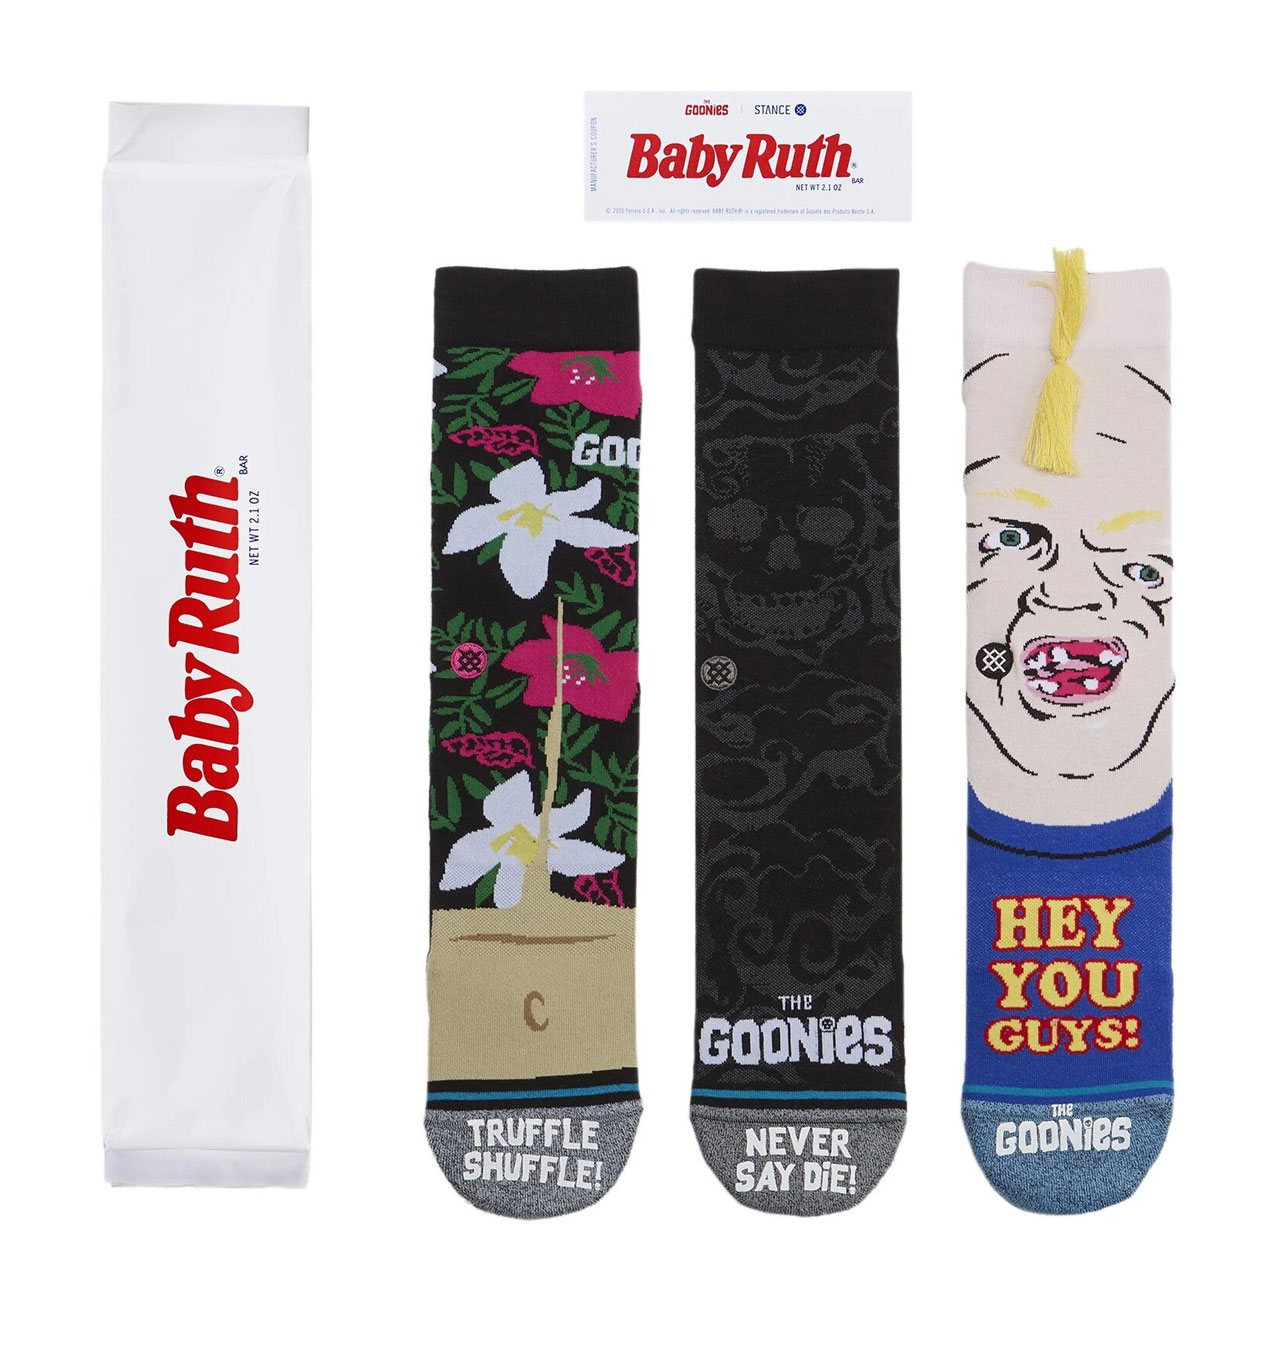 Stance---Goonies-Select-Baby-Ruth-Box-1